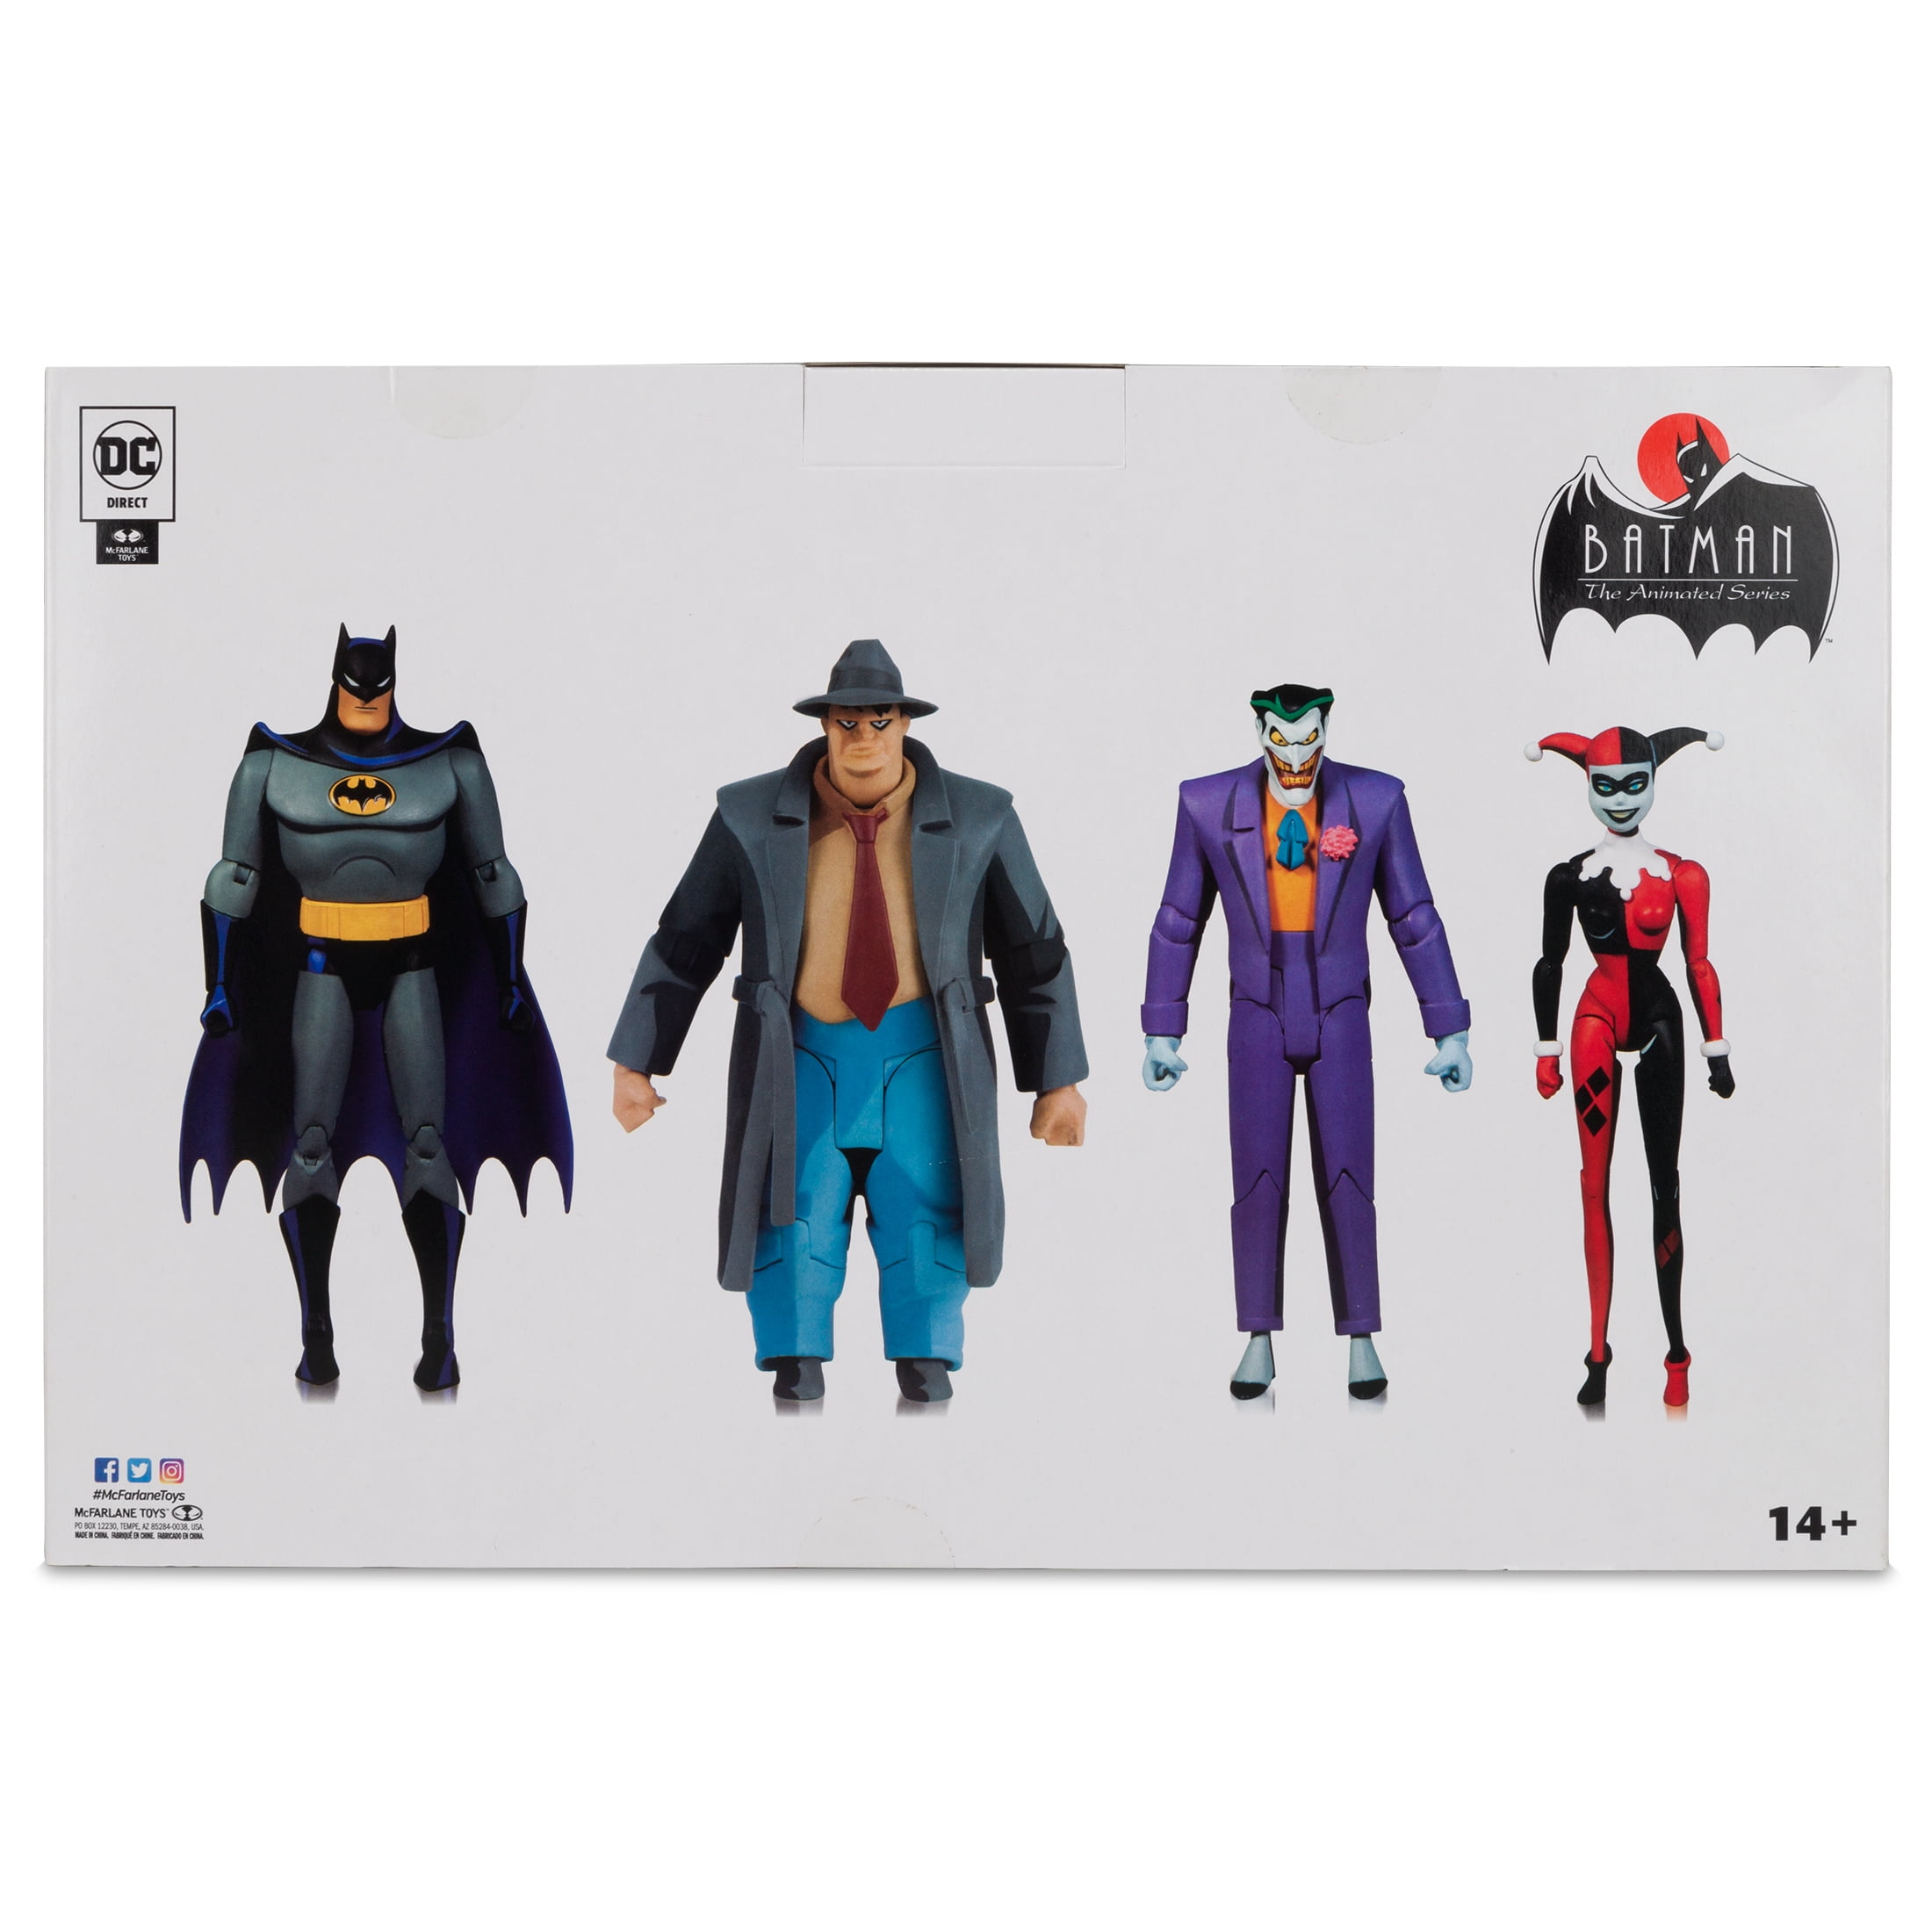 McFarlane Toys DC Direct Batman the Animated Series 4 Pack Collectible Action  Figures includes Batman, The Joker, Harley Quinn, and Harvey Bullock  Walmart Exclusive 